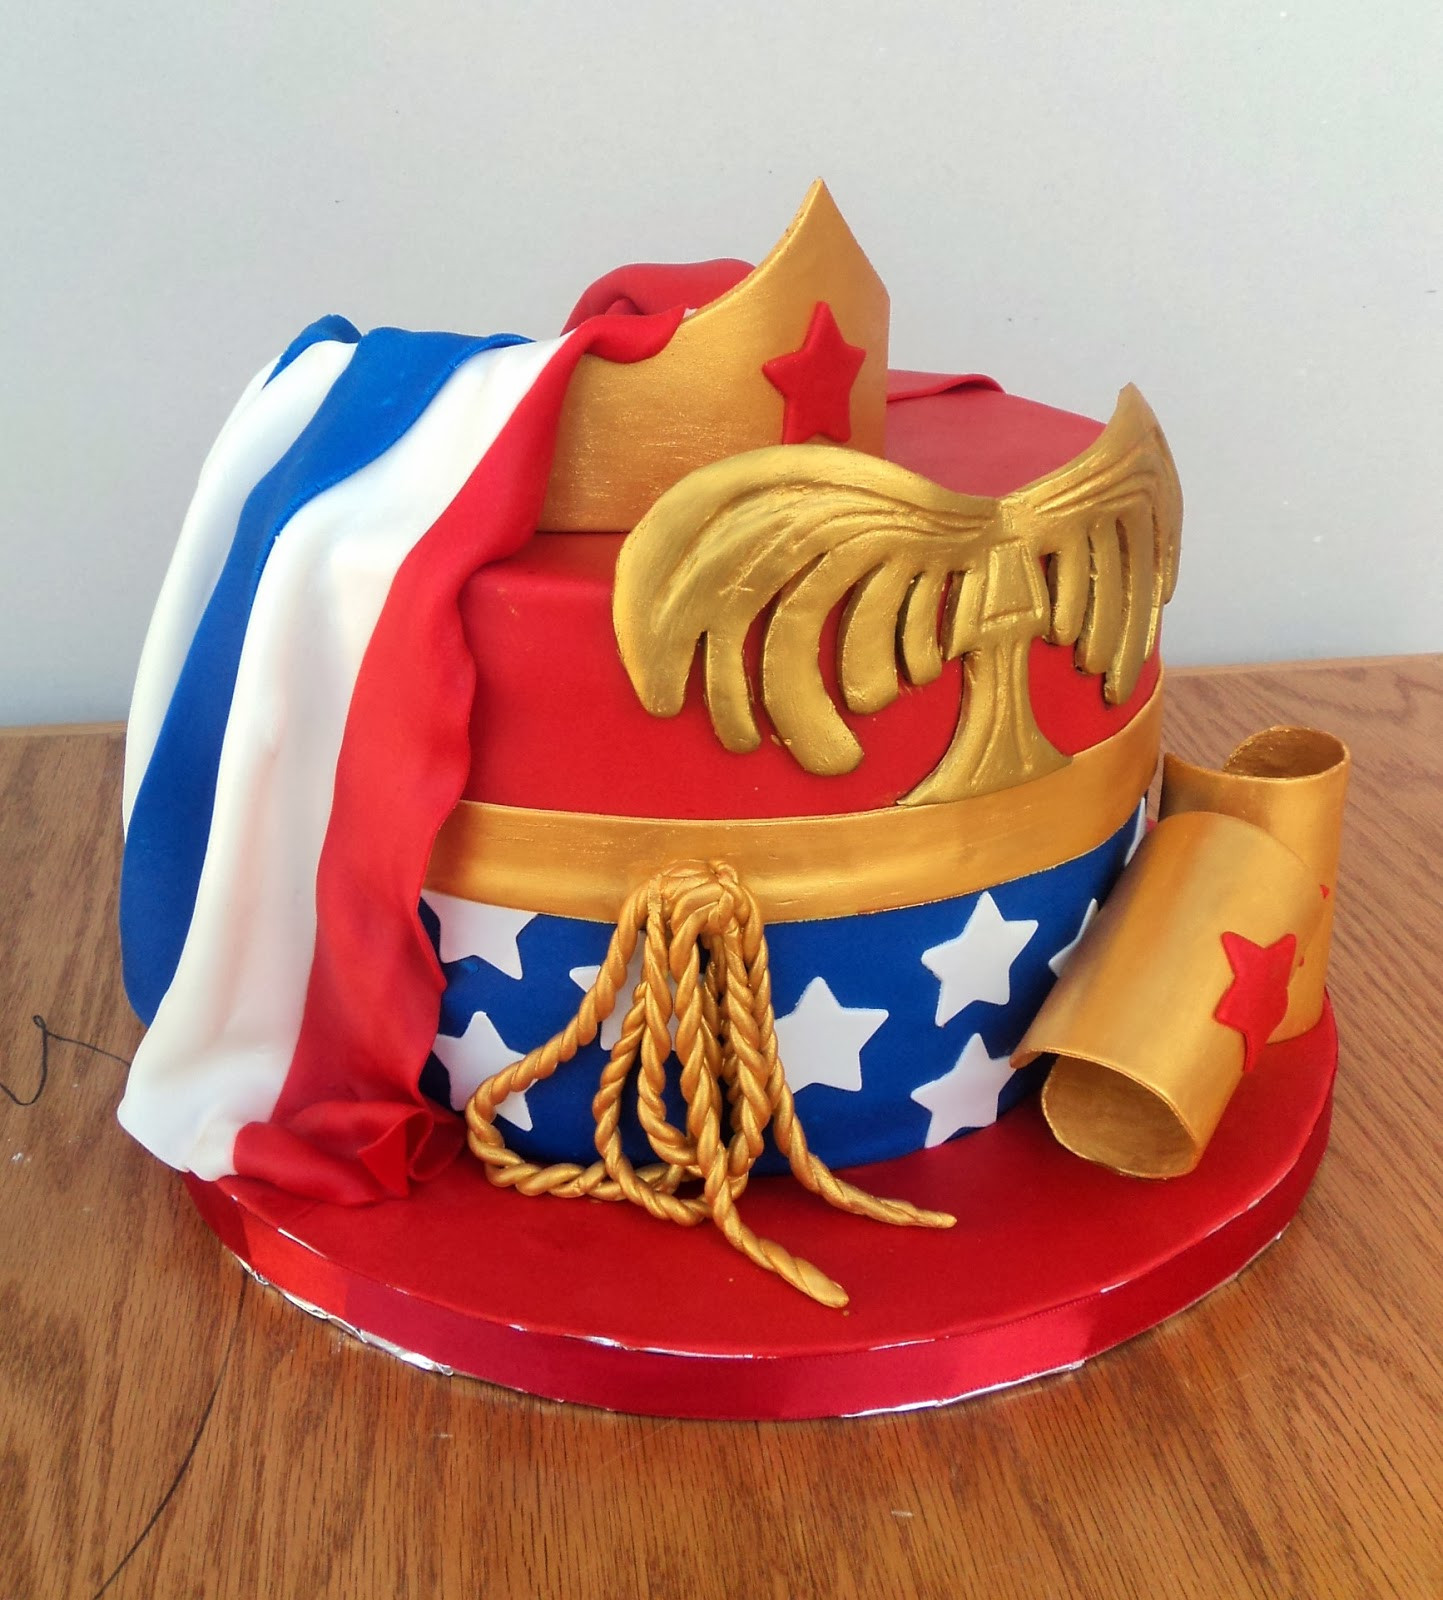 Woman Birthday Cake
 Delectable Cakes Wonder Woman with Cape Birthday Cake